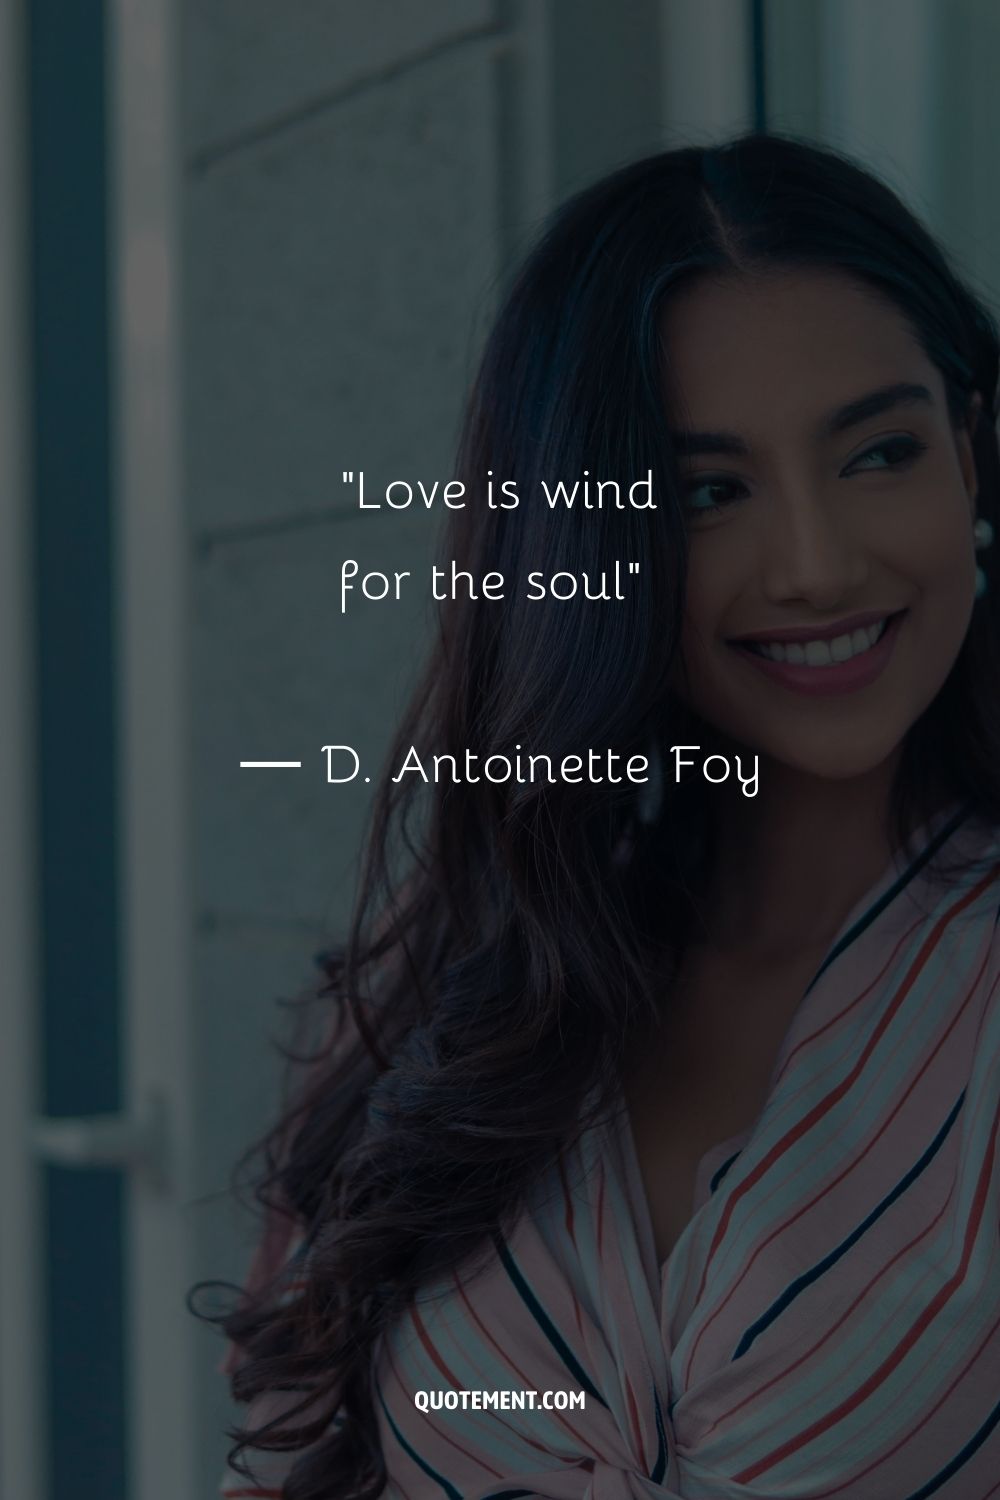 Love is wind for the soul